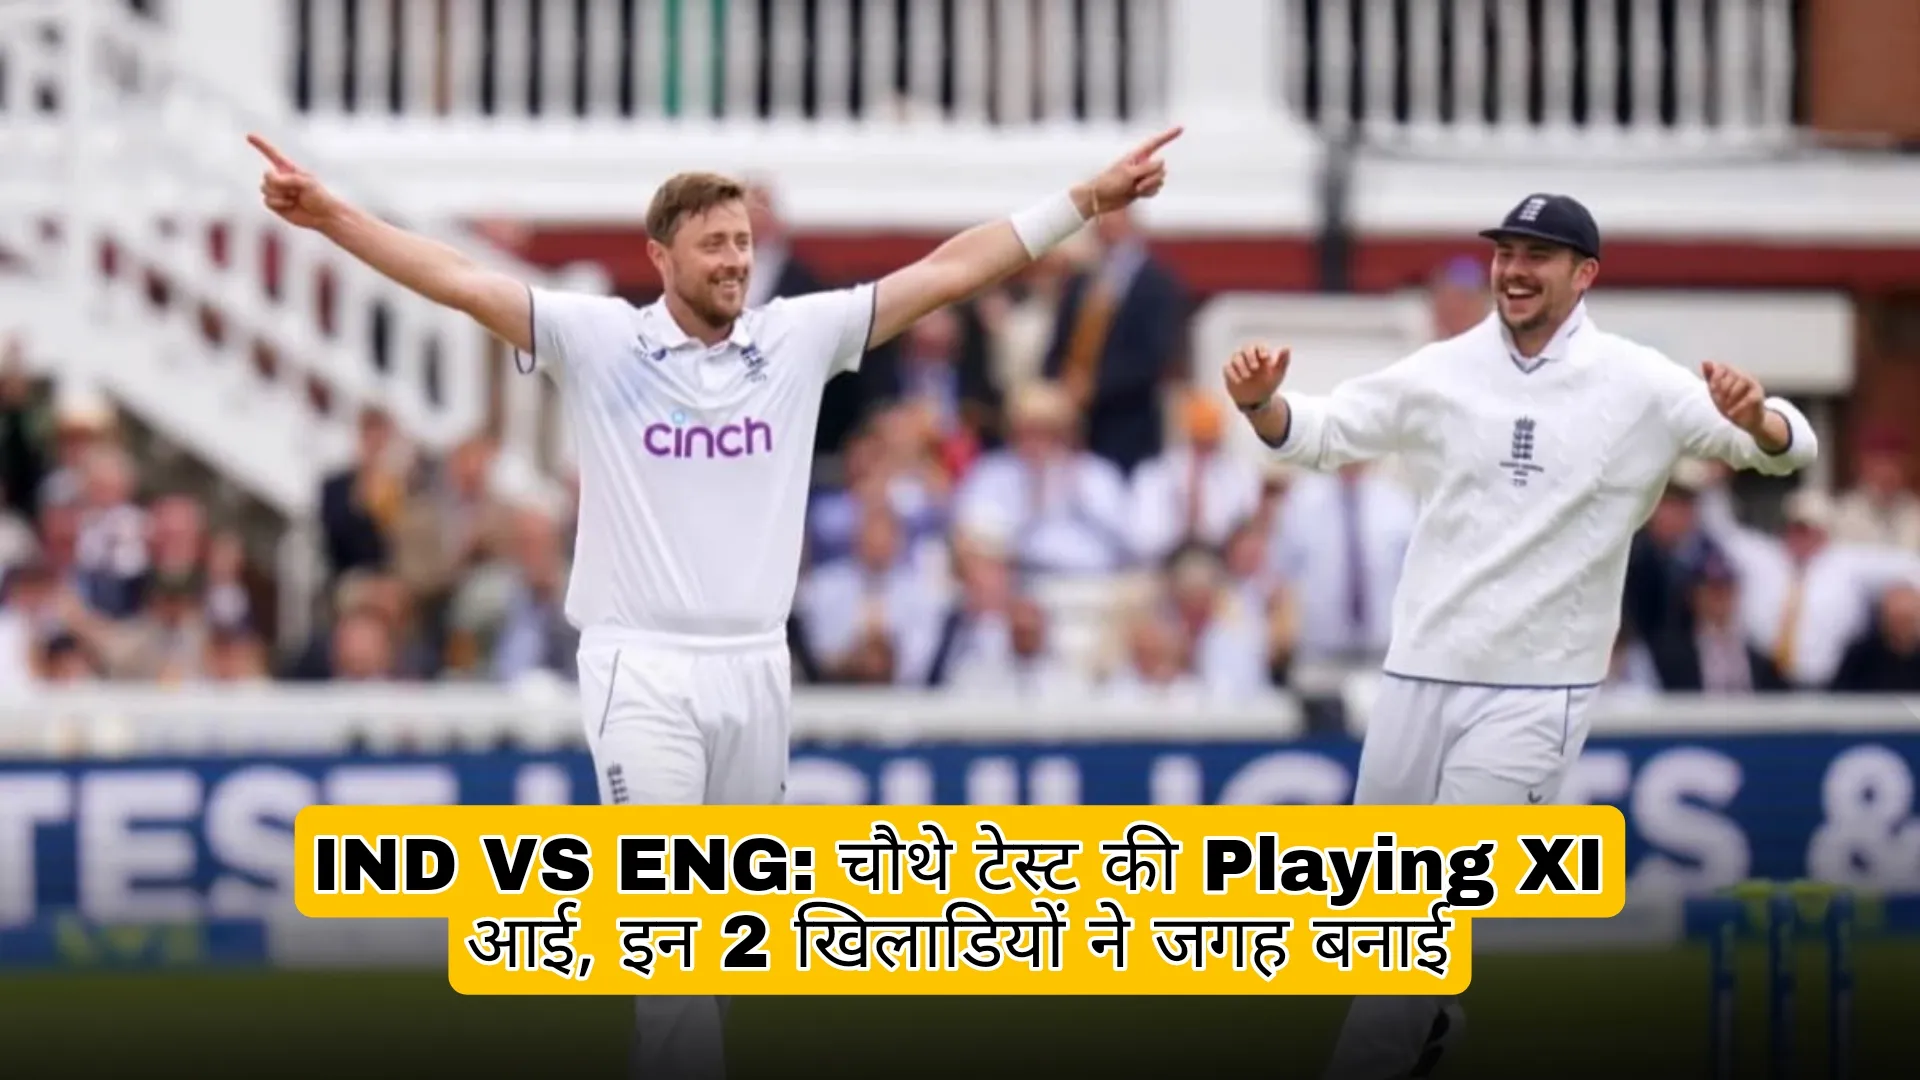 IND VS ENG 4th Test Playing XI